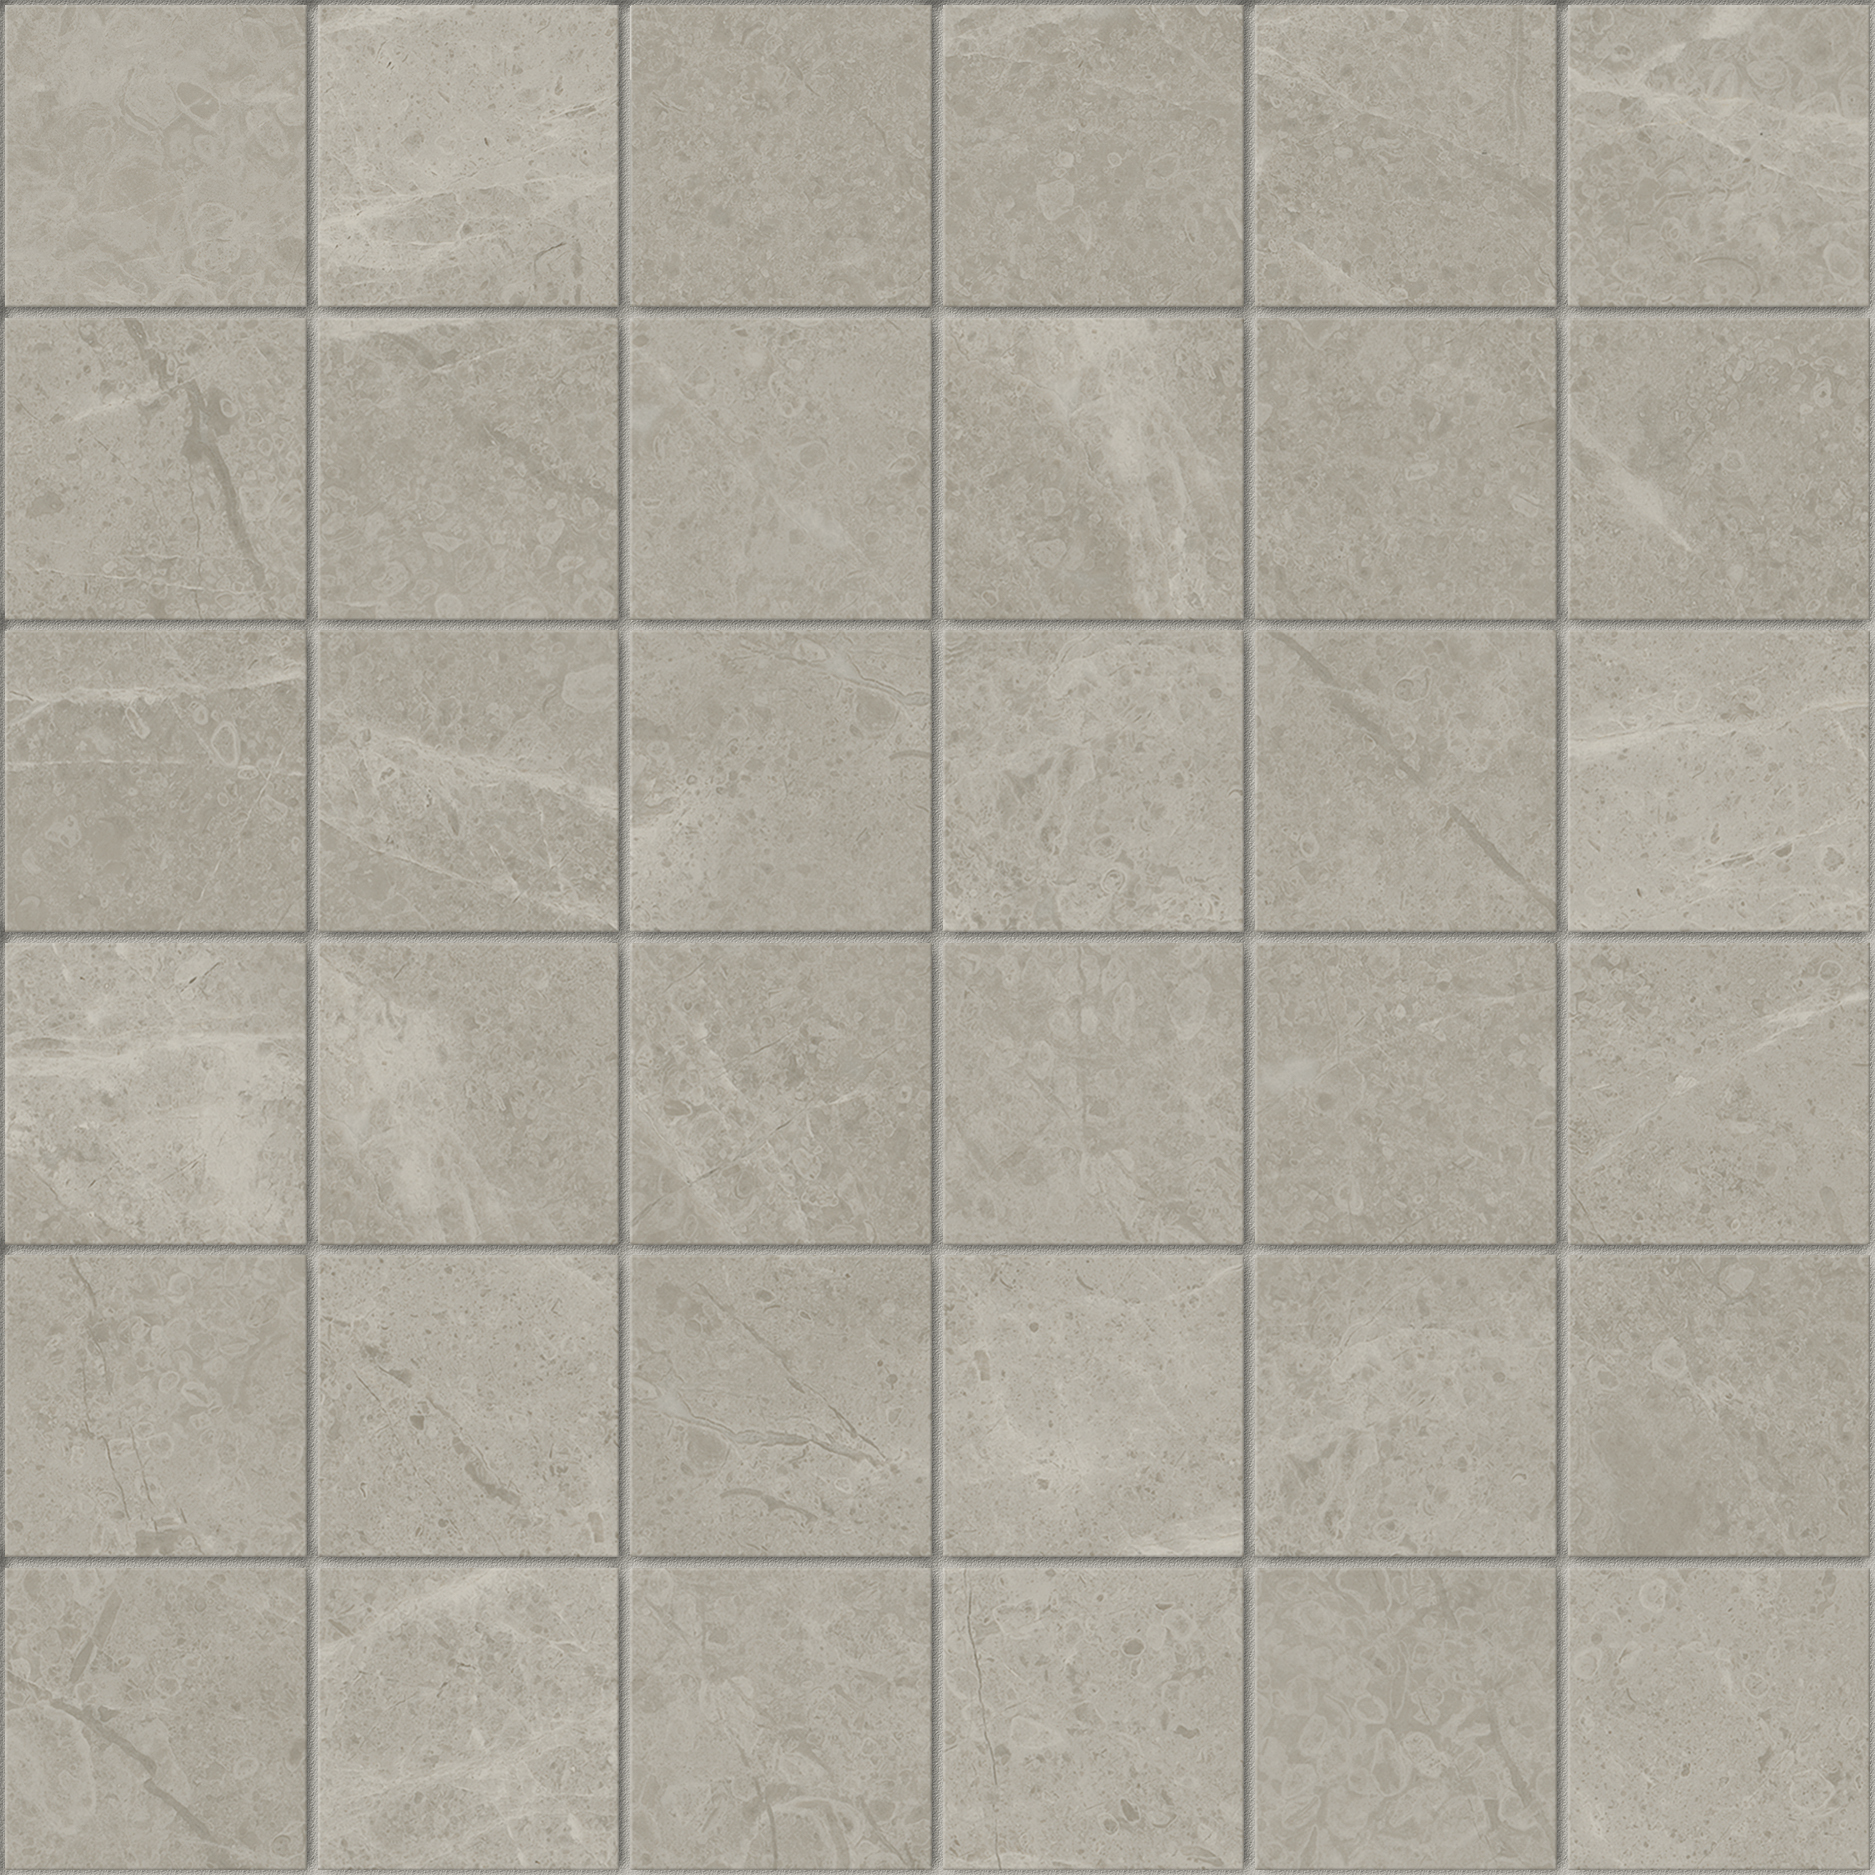 vanizio straight stack 2x2-inch pattern glazed porcelain mosaic from torino anatolia collection distributed by surface group international matte finish straight edge edge mesh shape